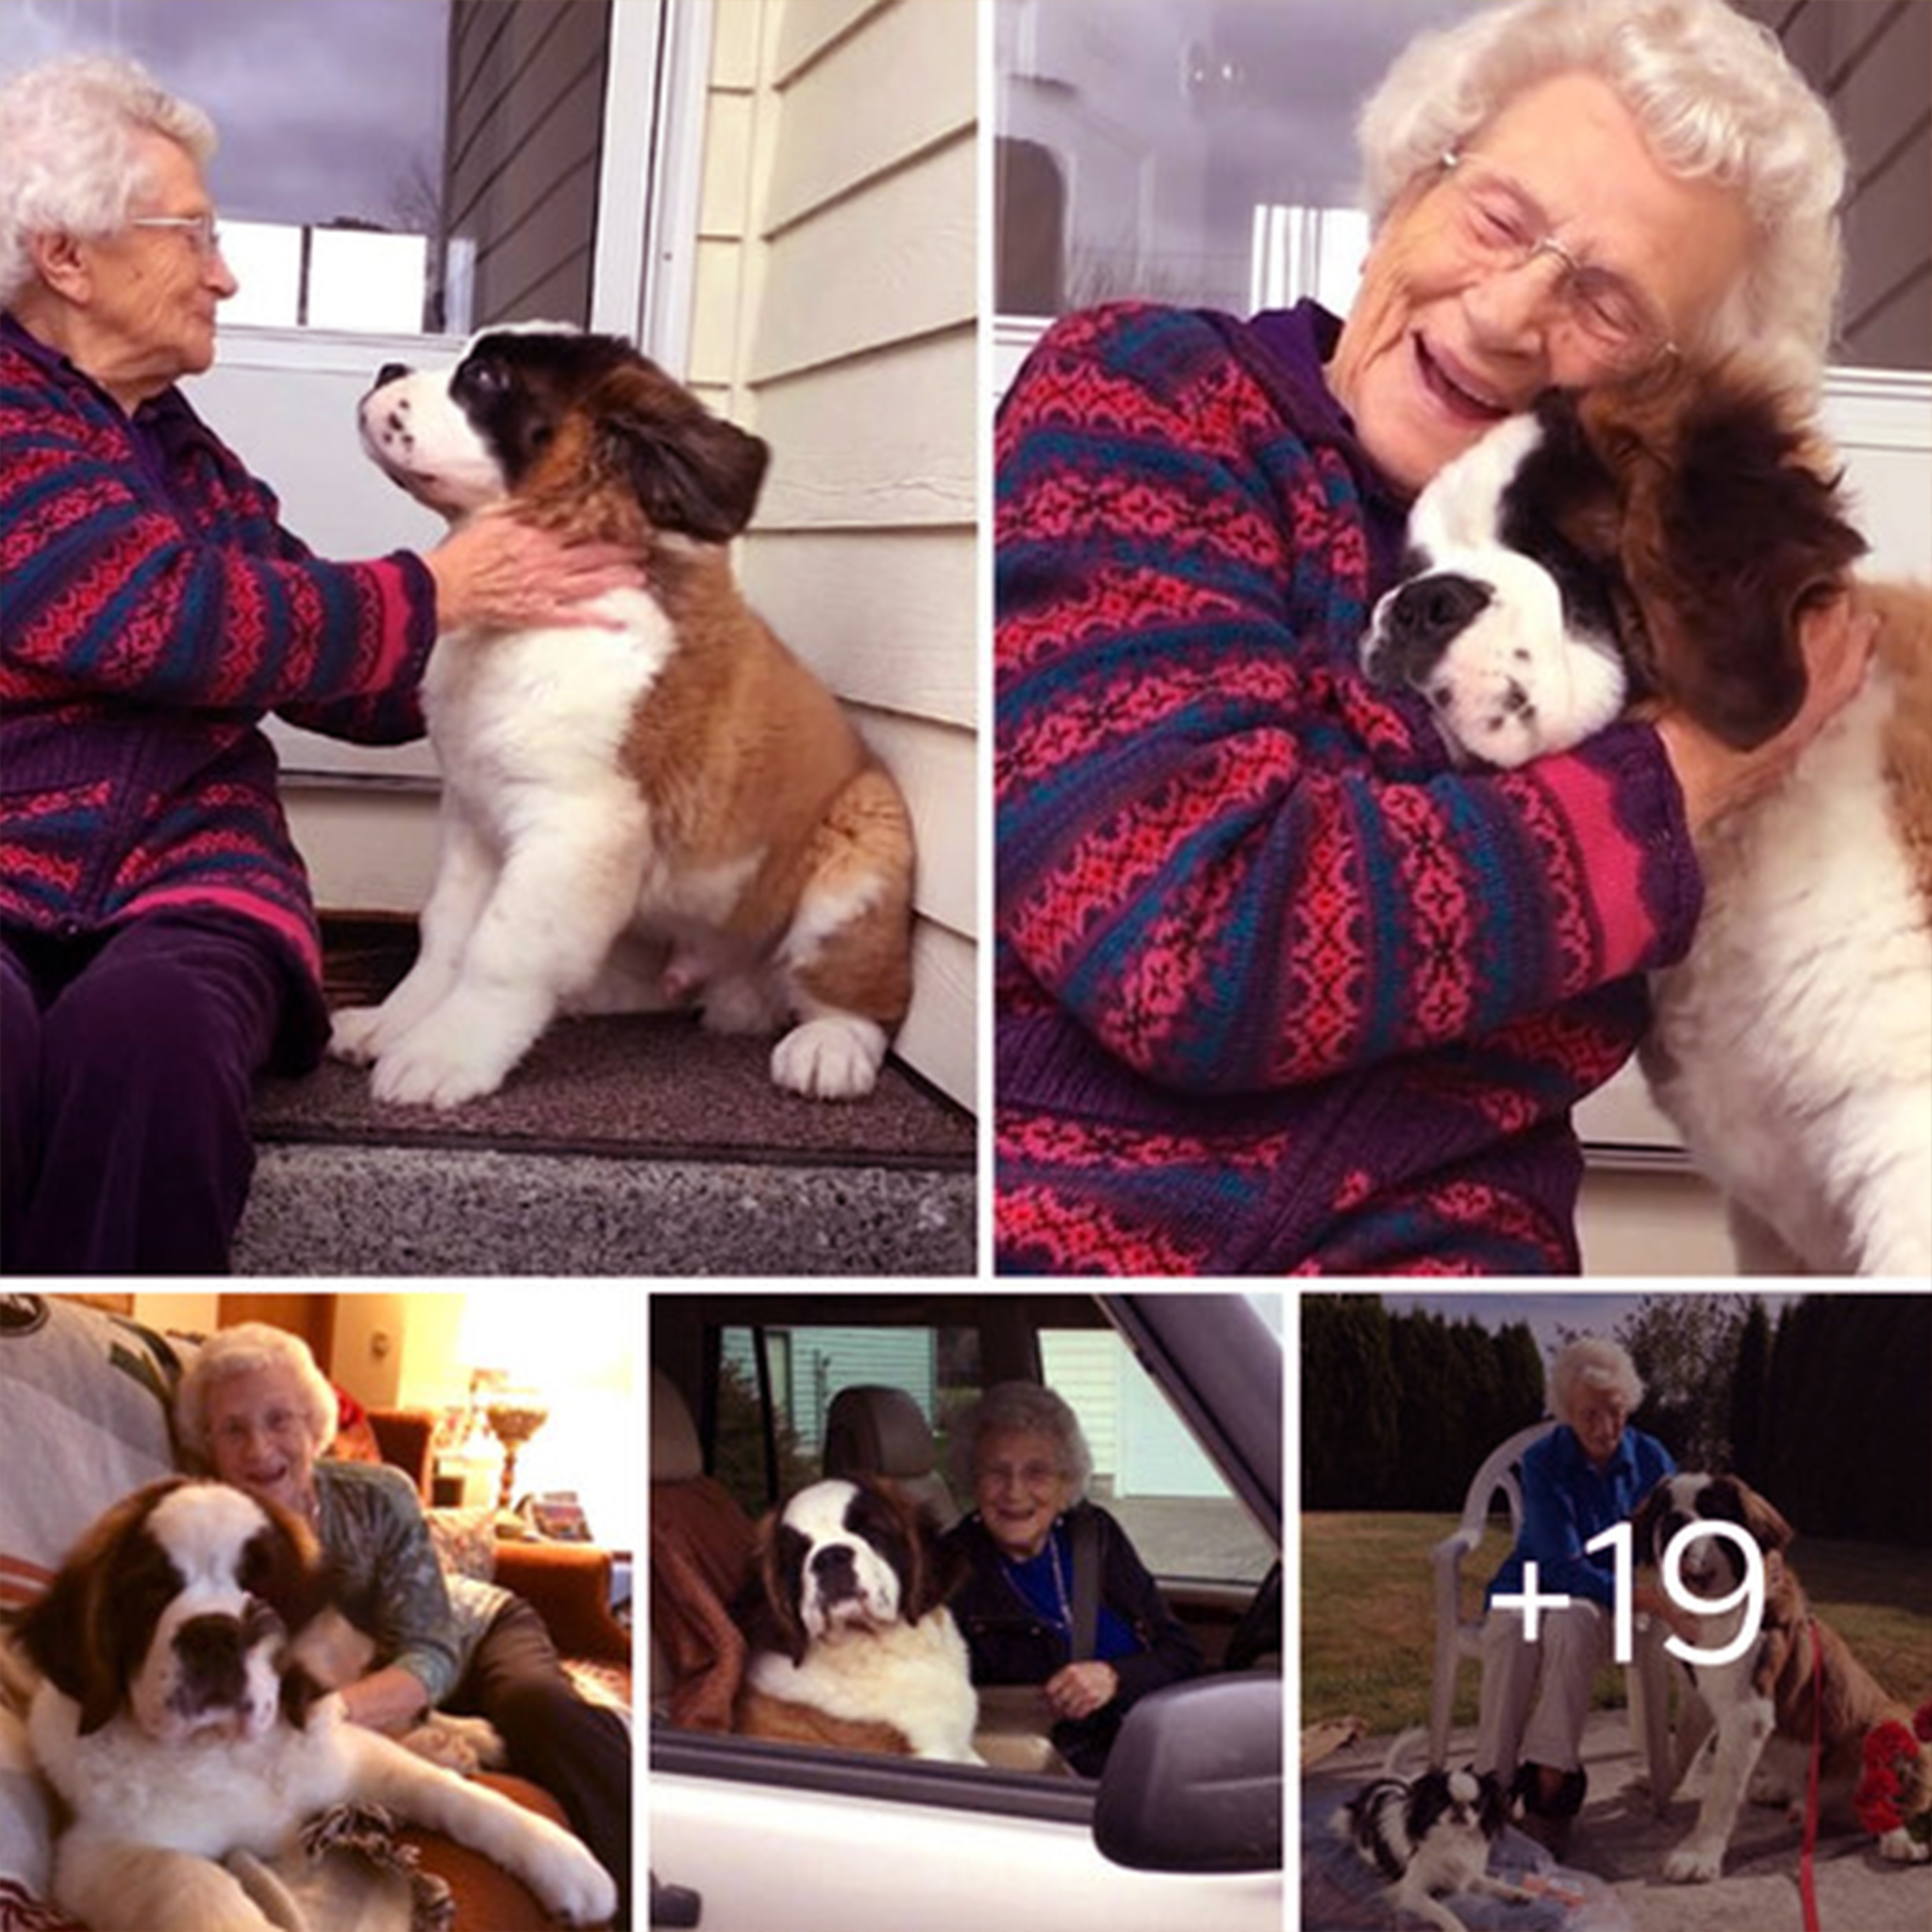 “Tale of Friendship: A Dog’s Heartwarming Mission to Befriend a Solitary Widow (Video)”